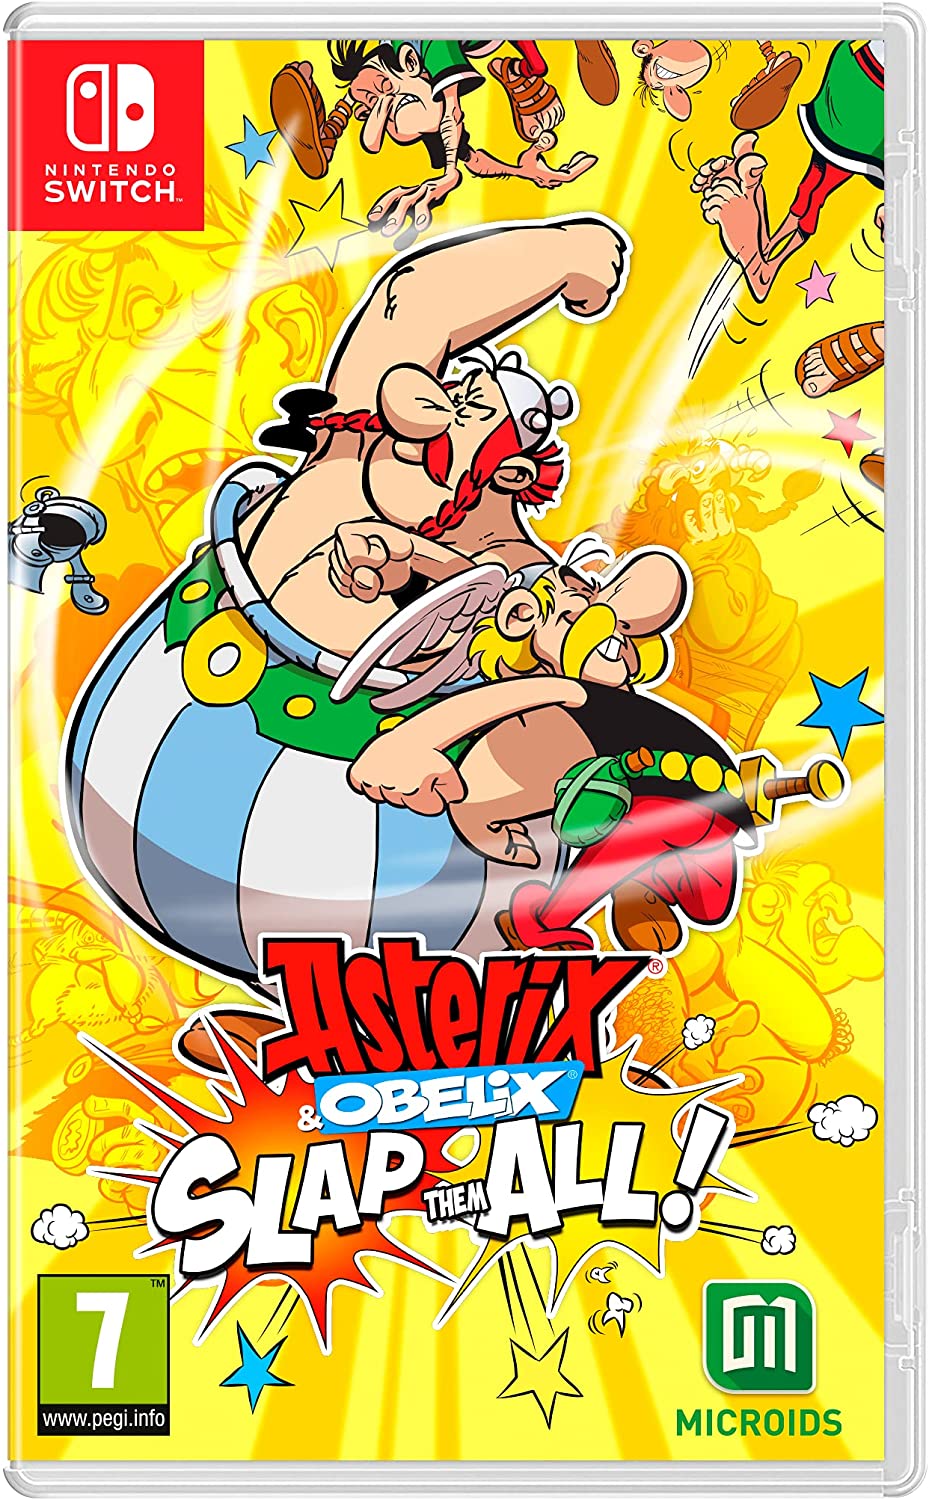 Asterix & Obelix: Slap Them All - Limited Edition (Nintendo Switch)